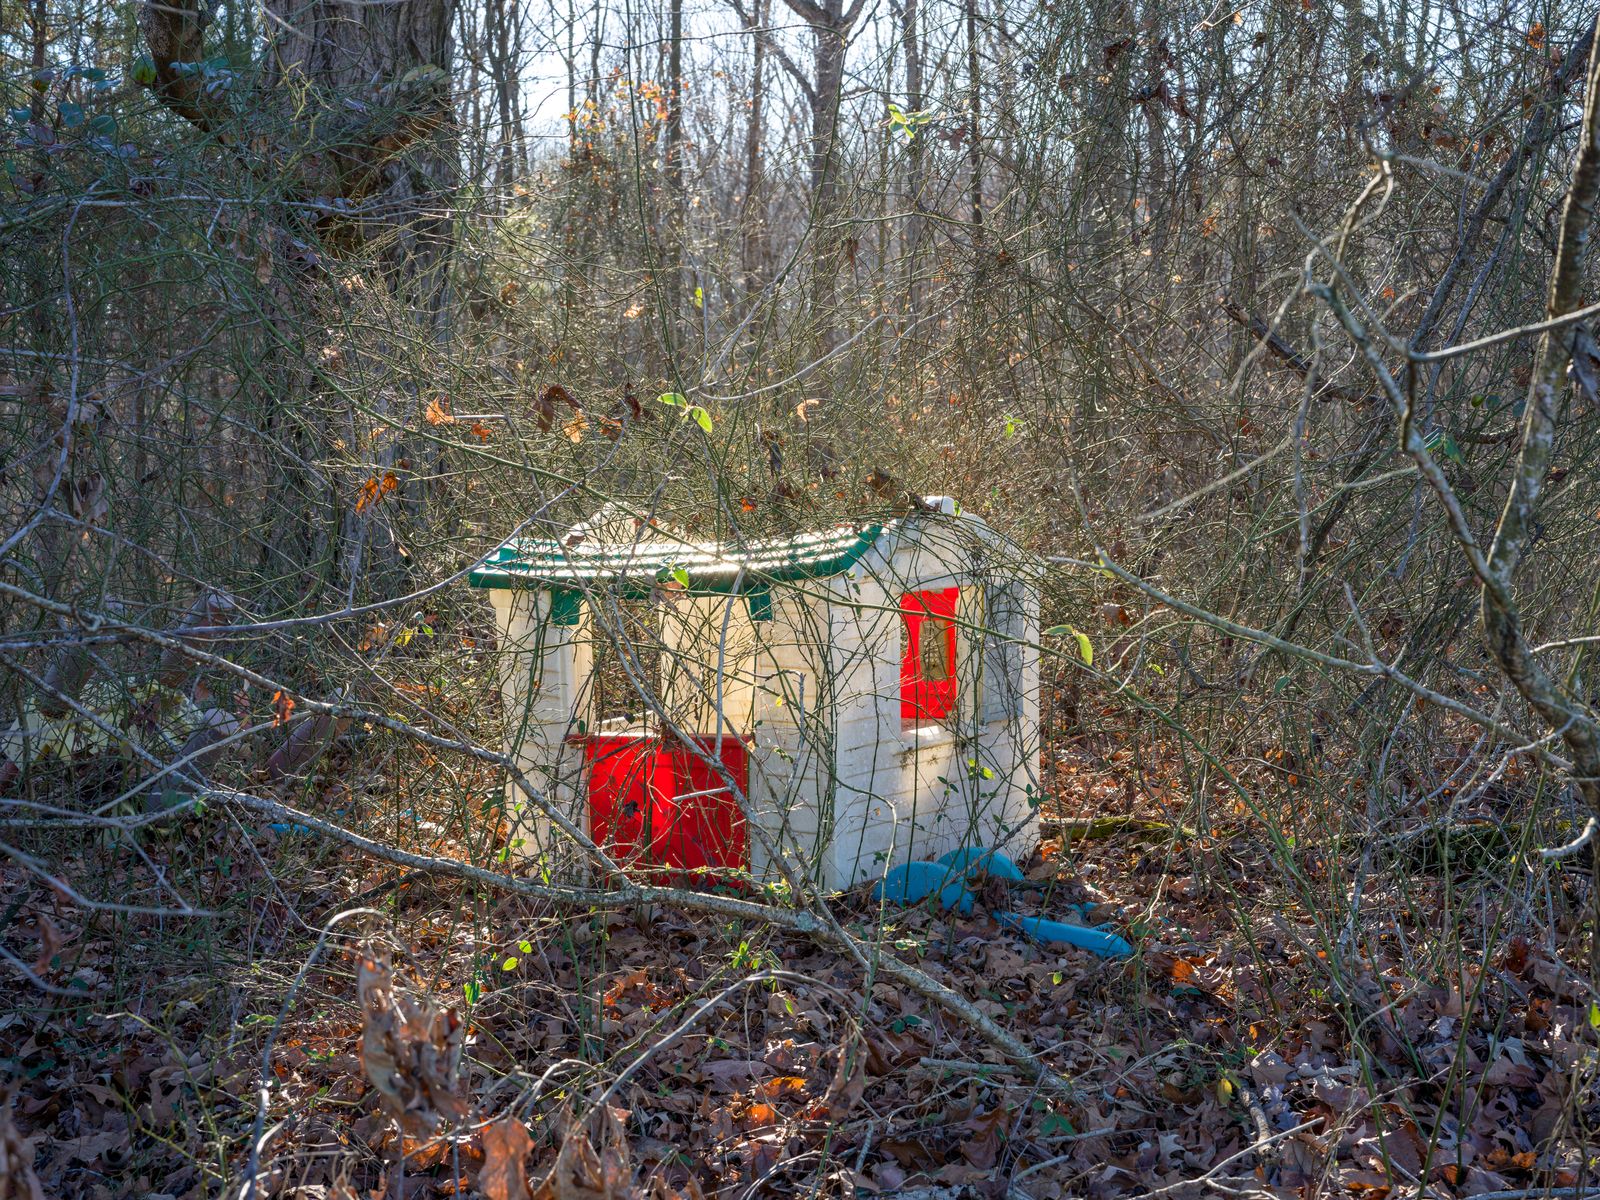 © Michael Young - Abandoned Playhouse in the Woods